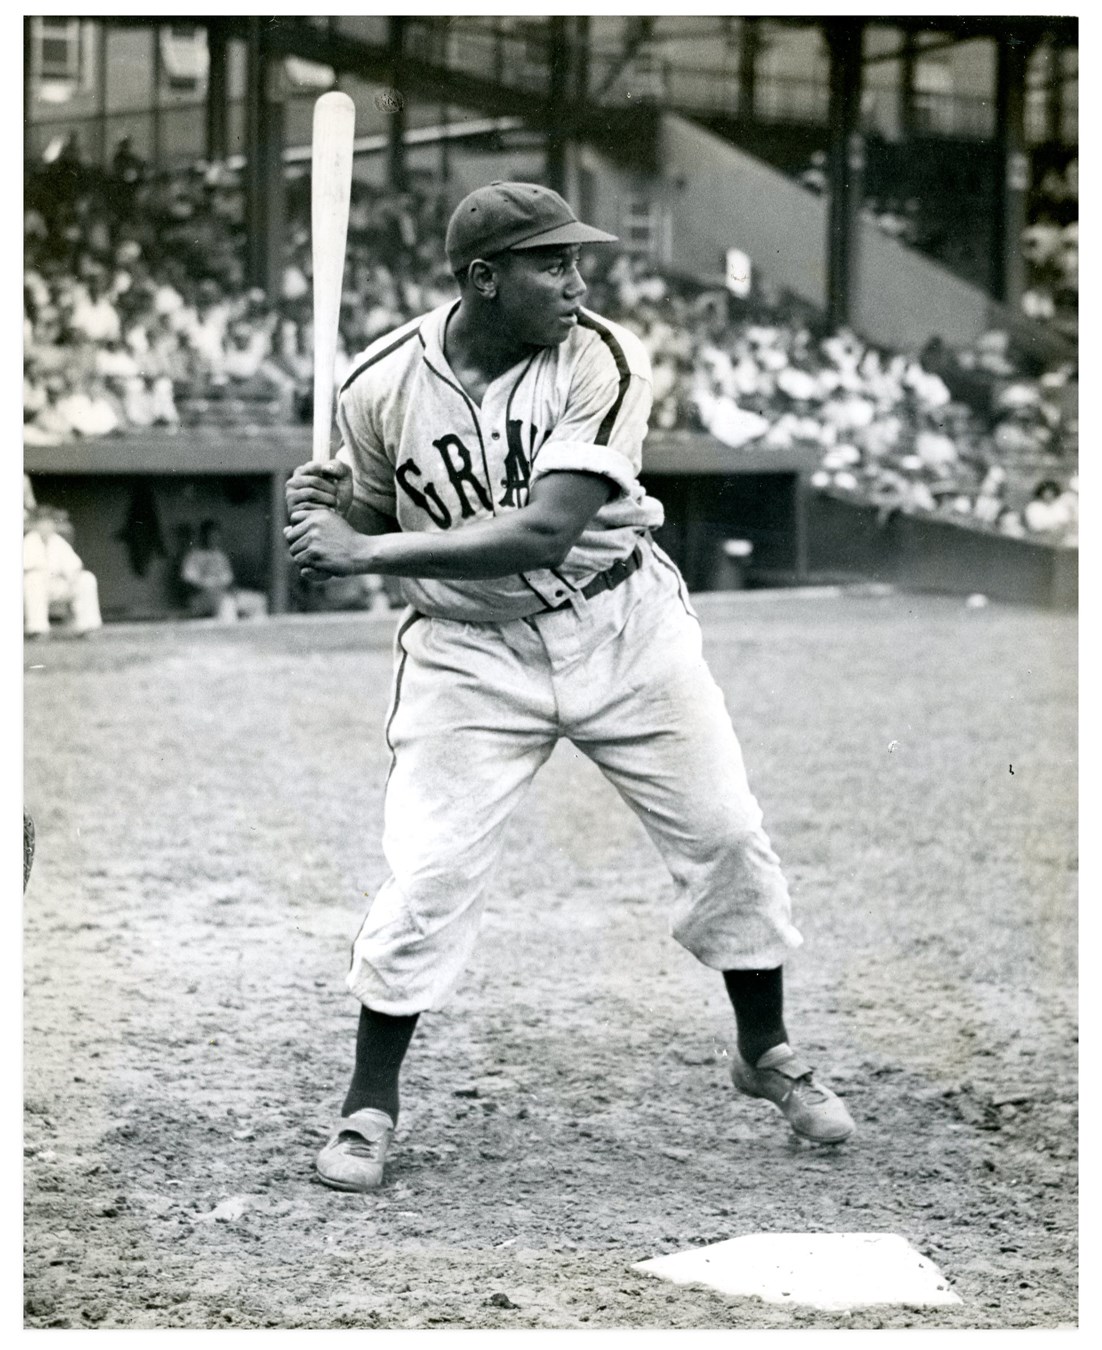 Details about   Josh Gibson Homestead Grays Catcher High Quality 11x14 Archival Photo